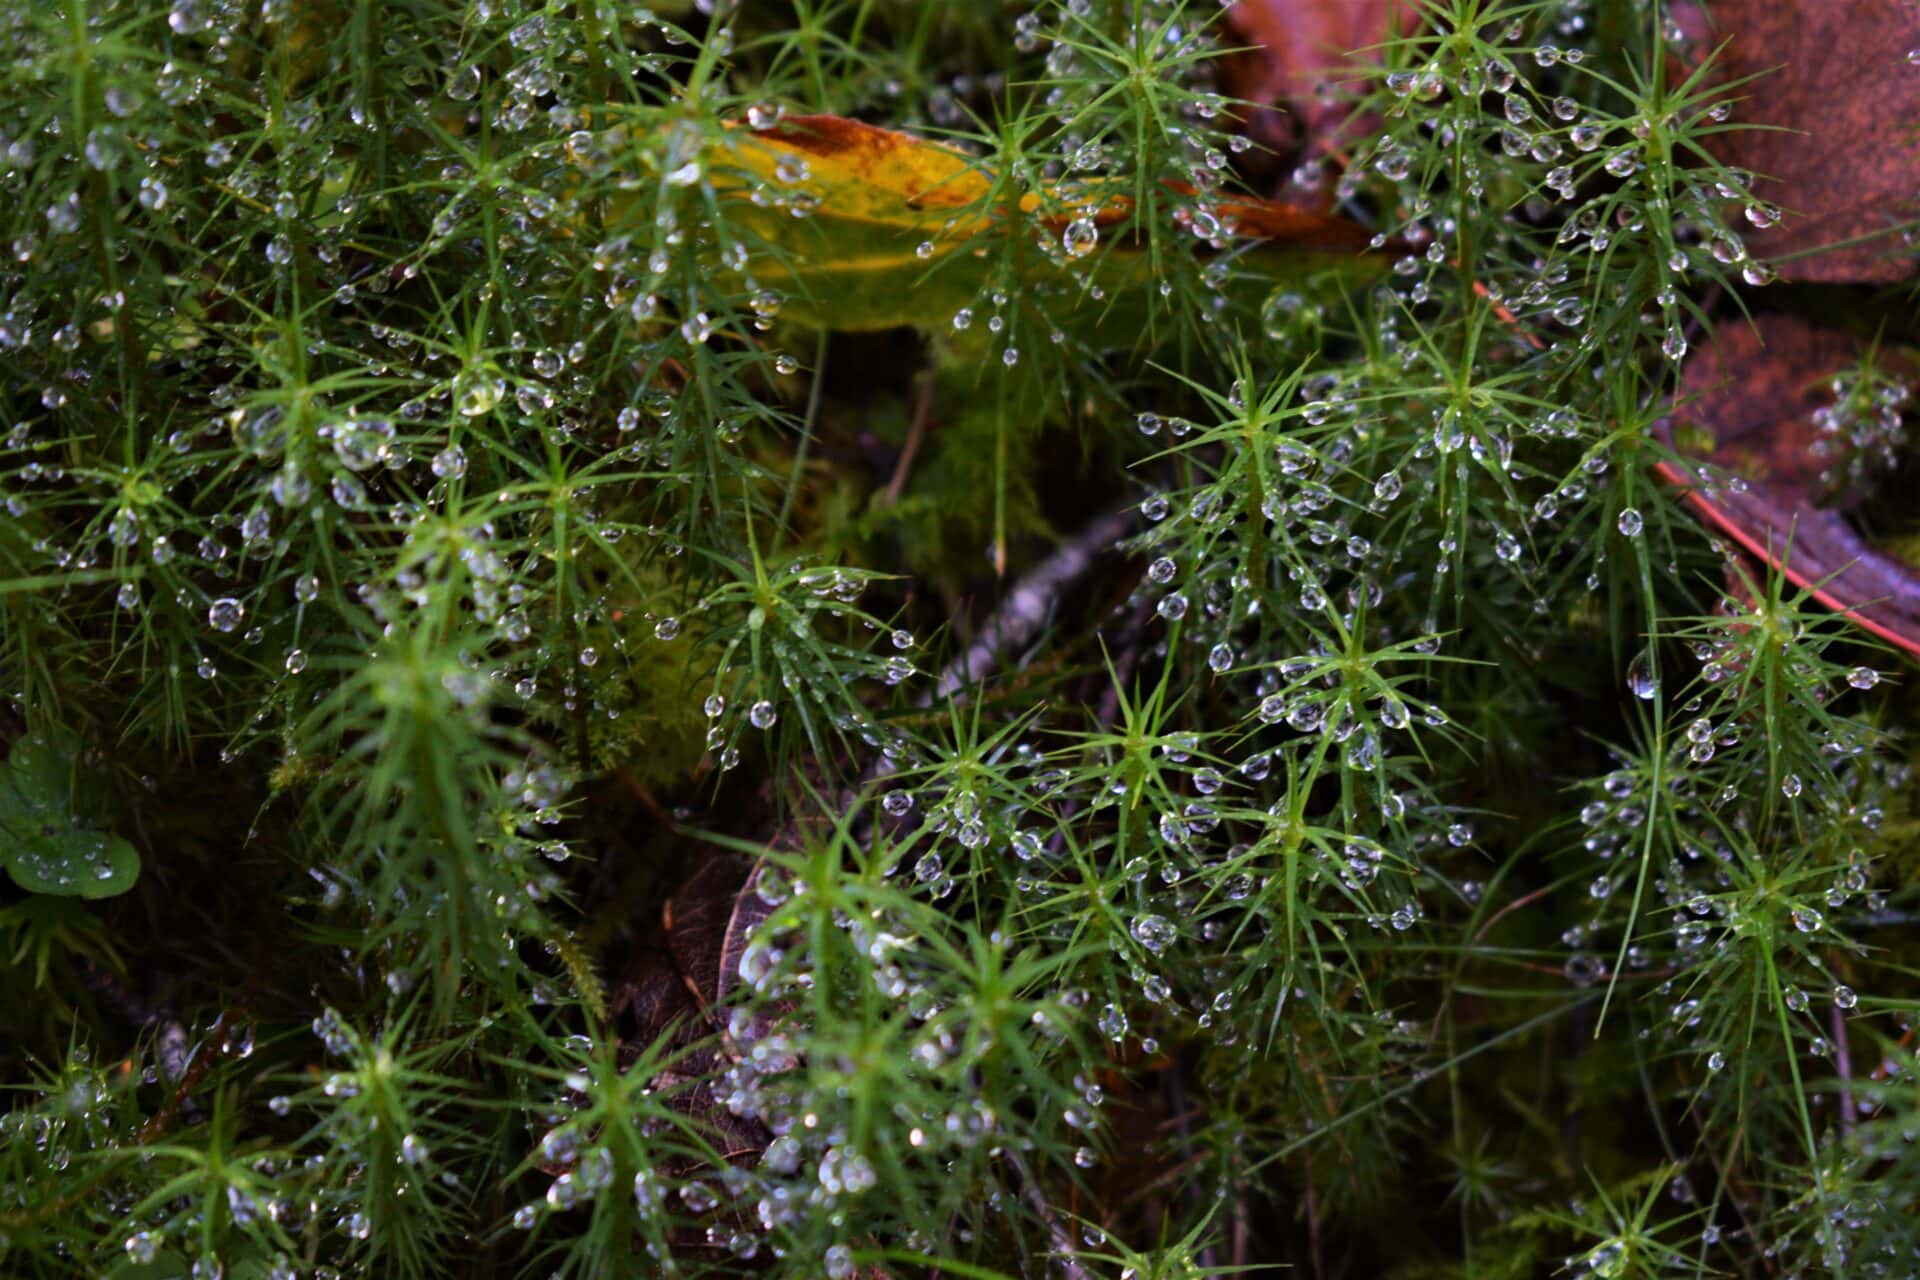 water drops hang of the thin leaves of small plants on the forest floor